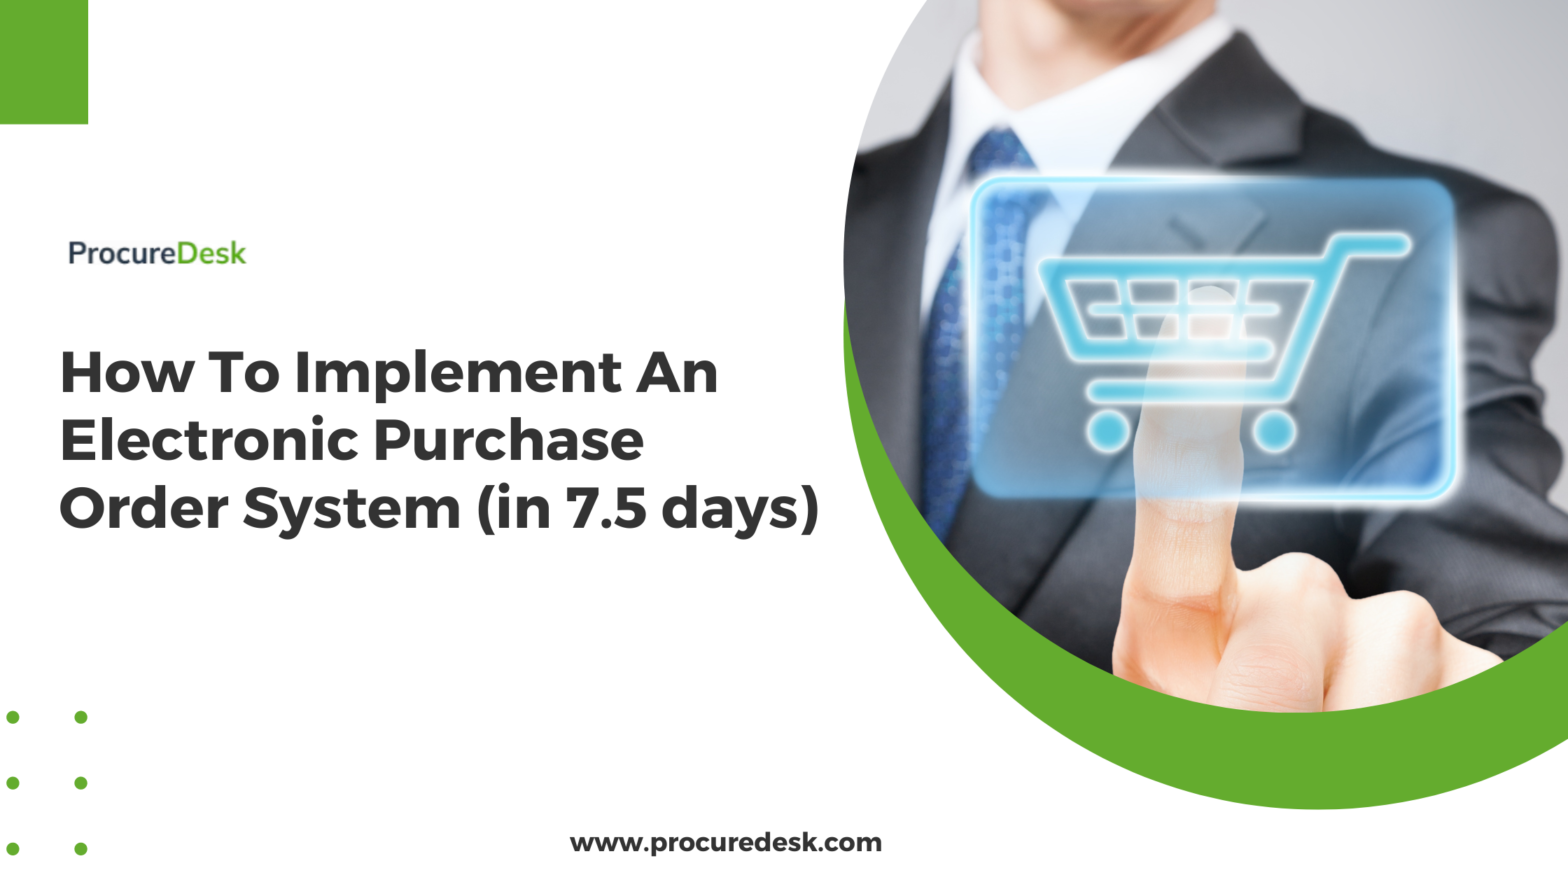 How To Implement An Electronic Purchase Order System (in 7.5 days)